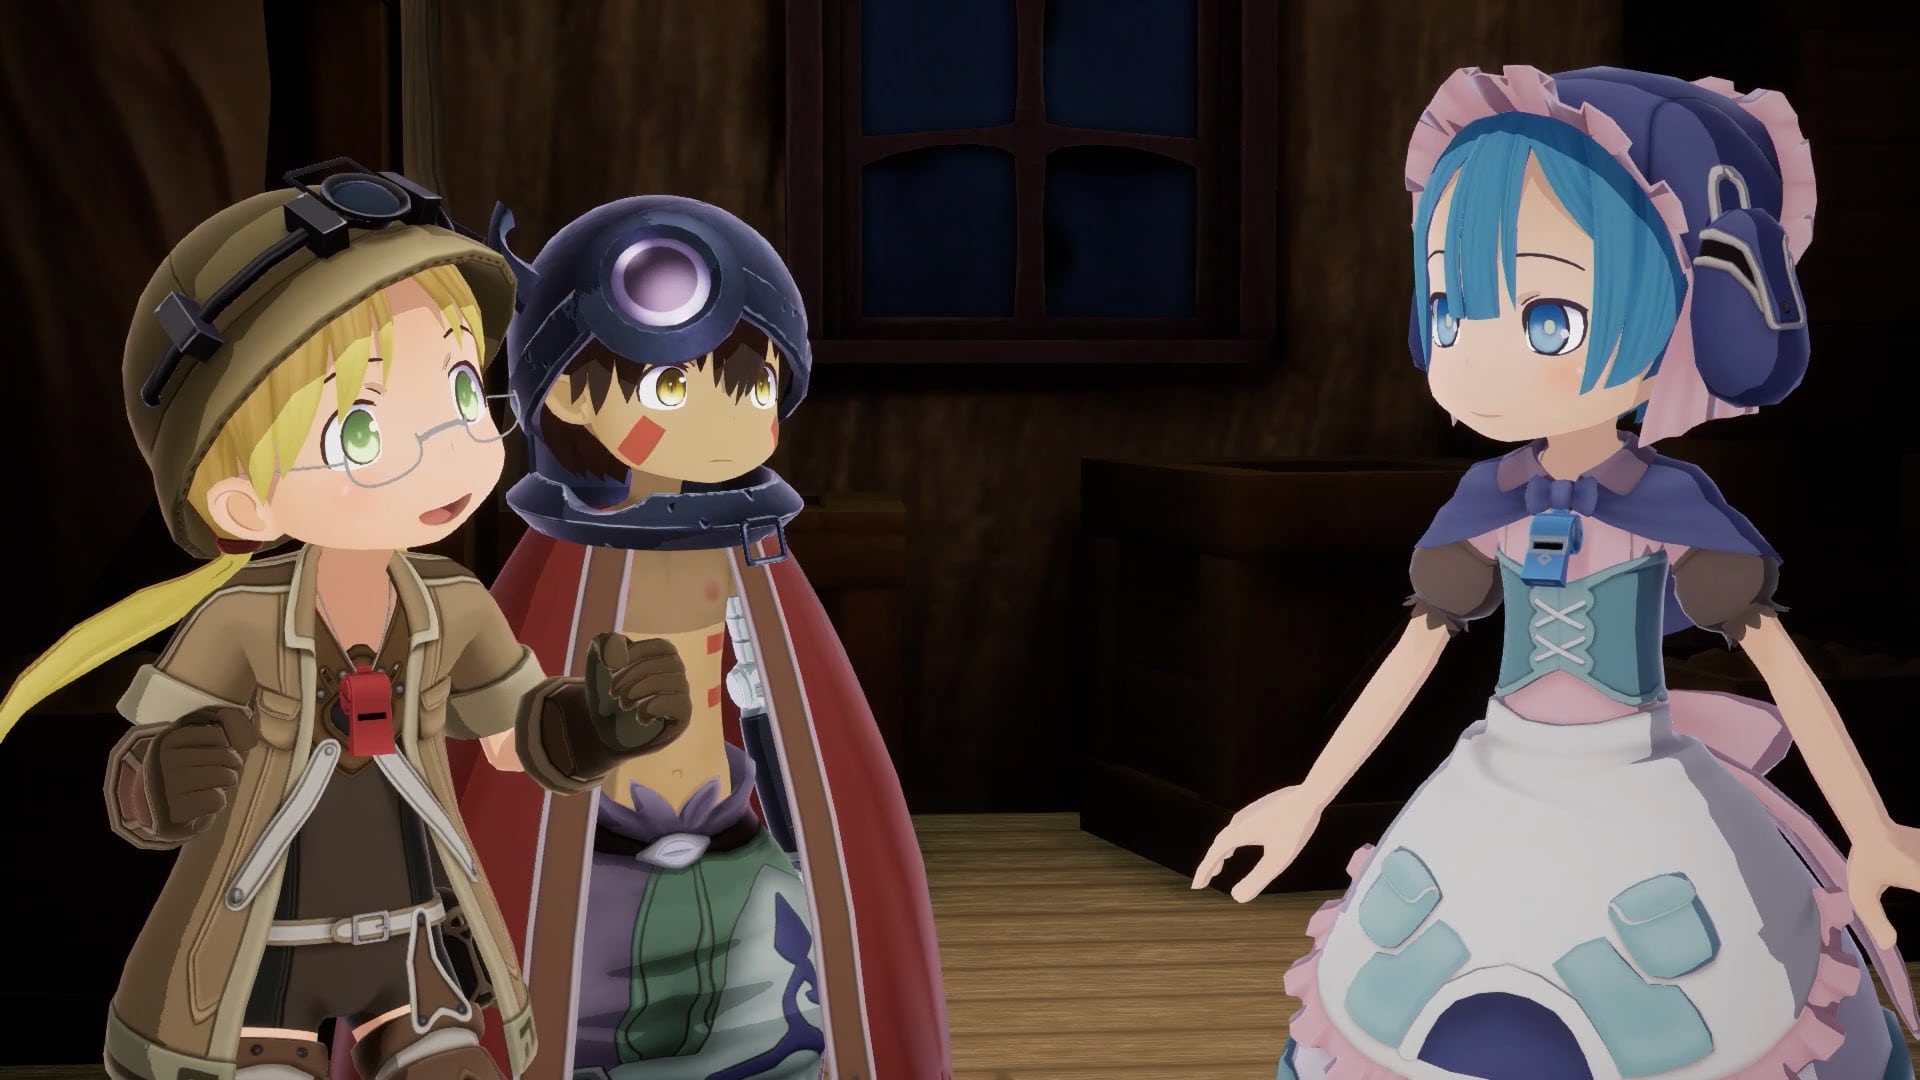 REVIEW] 2023 Made in Abyss : Binary Star falling into Darkness